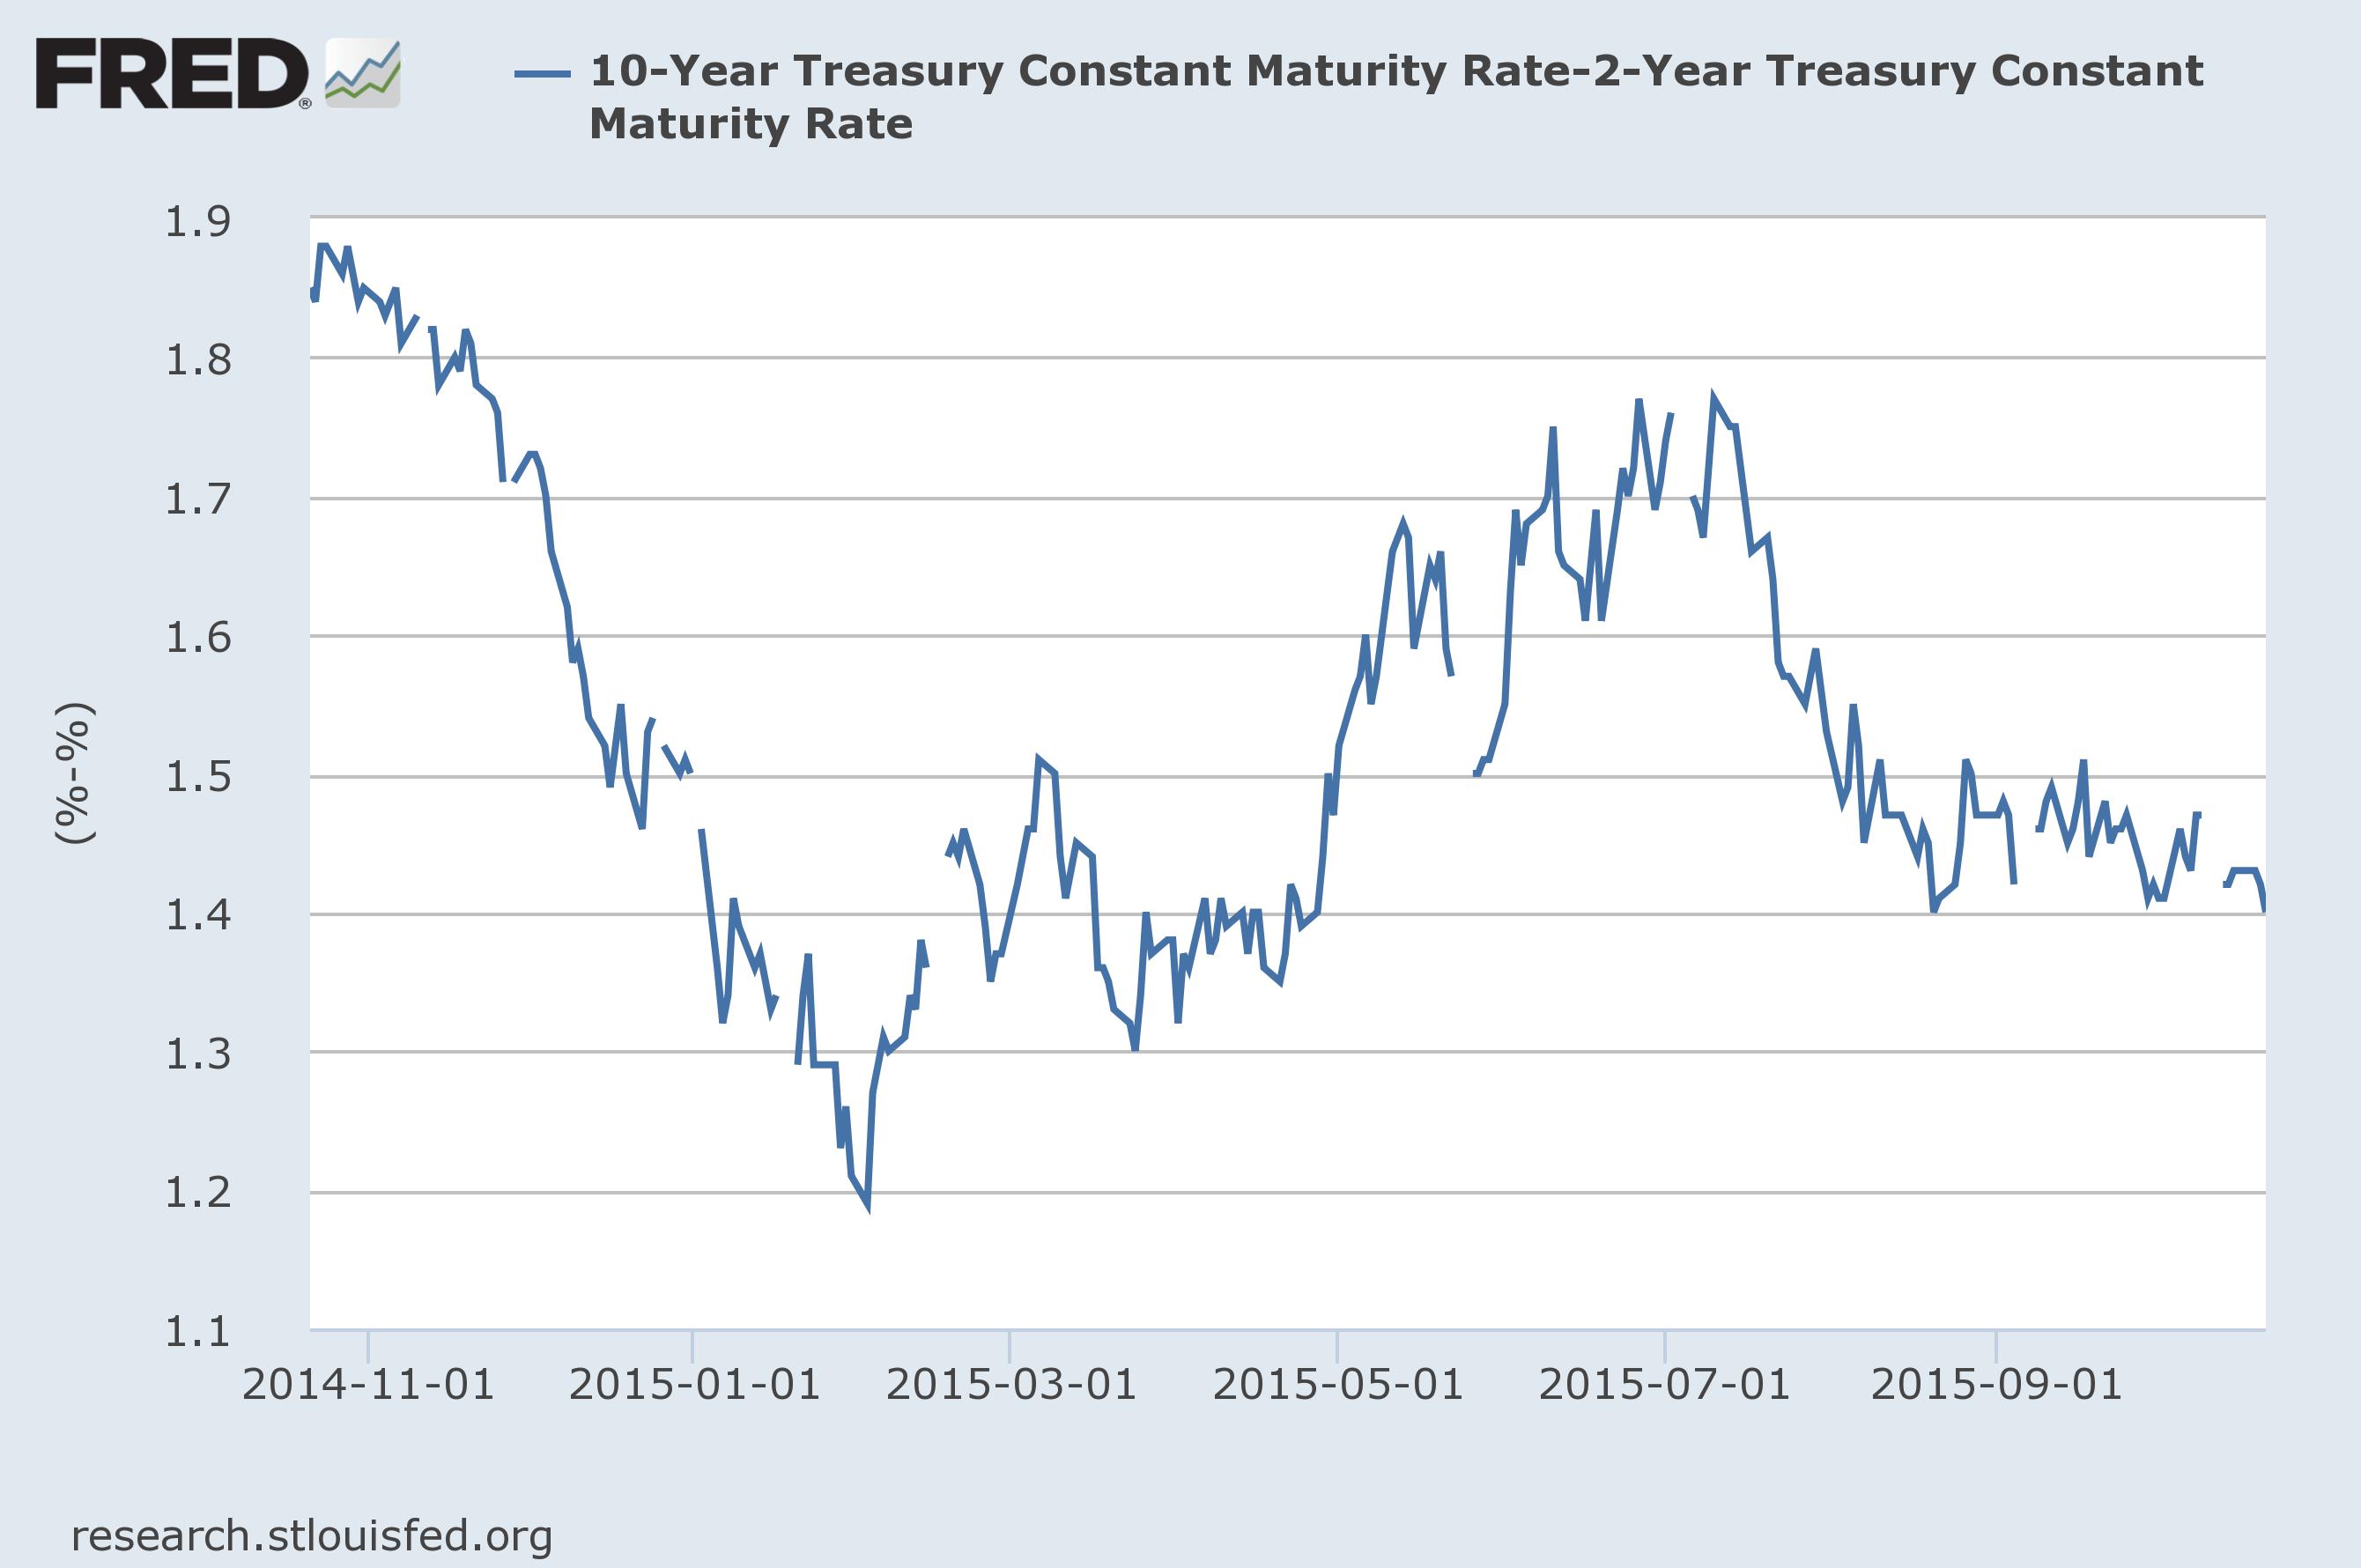 10 Year and 2 Year Treasury Constant Maturity Rate 2014-2015